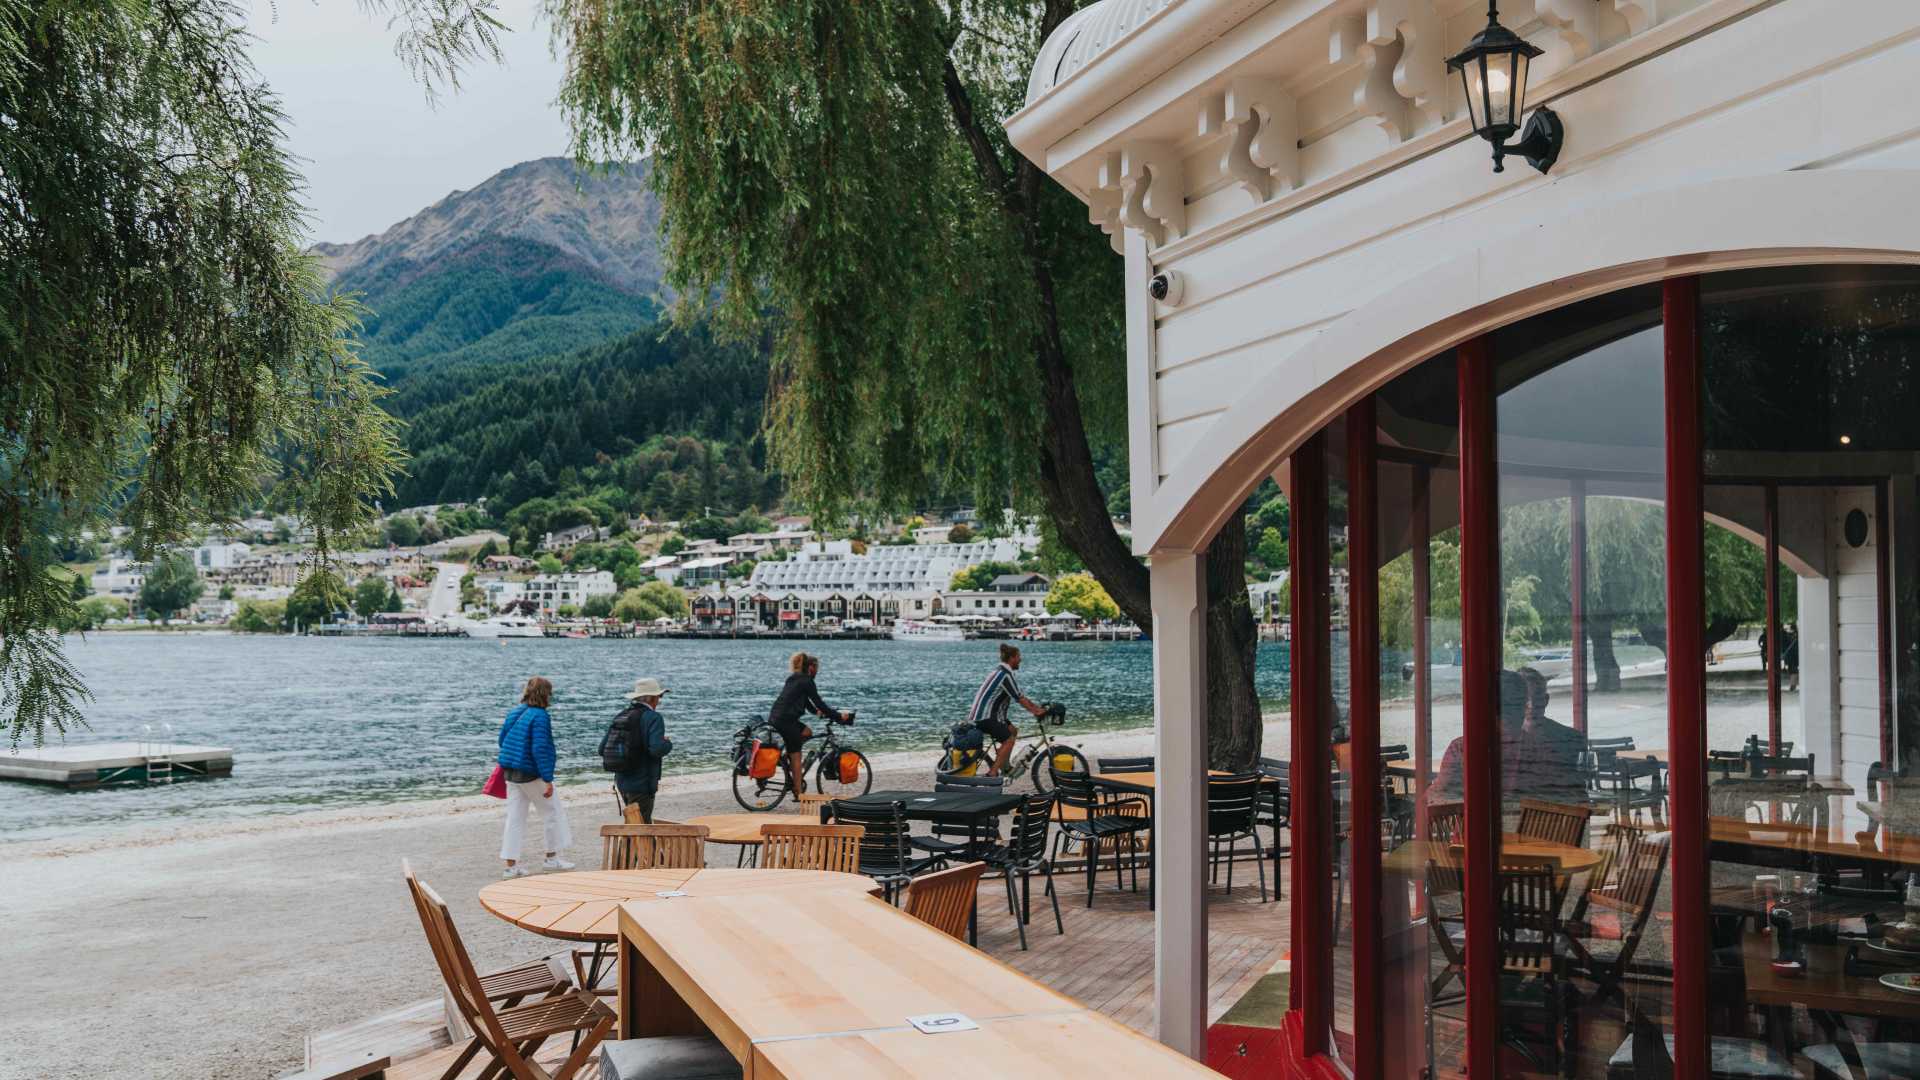 Ben Bayly Has Turned Queenstown's Heritage Bathhouse Building Into a Nostalgic Brit-Themed Eatery